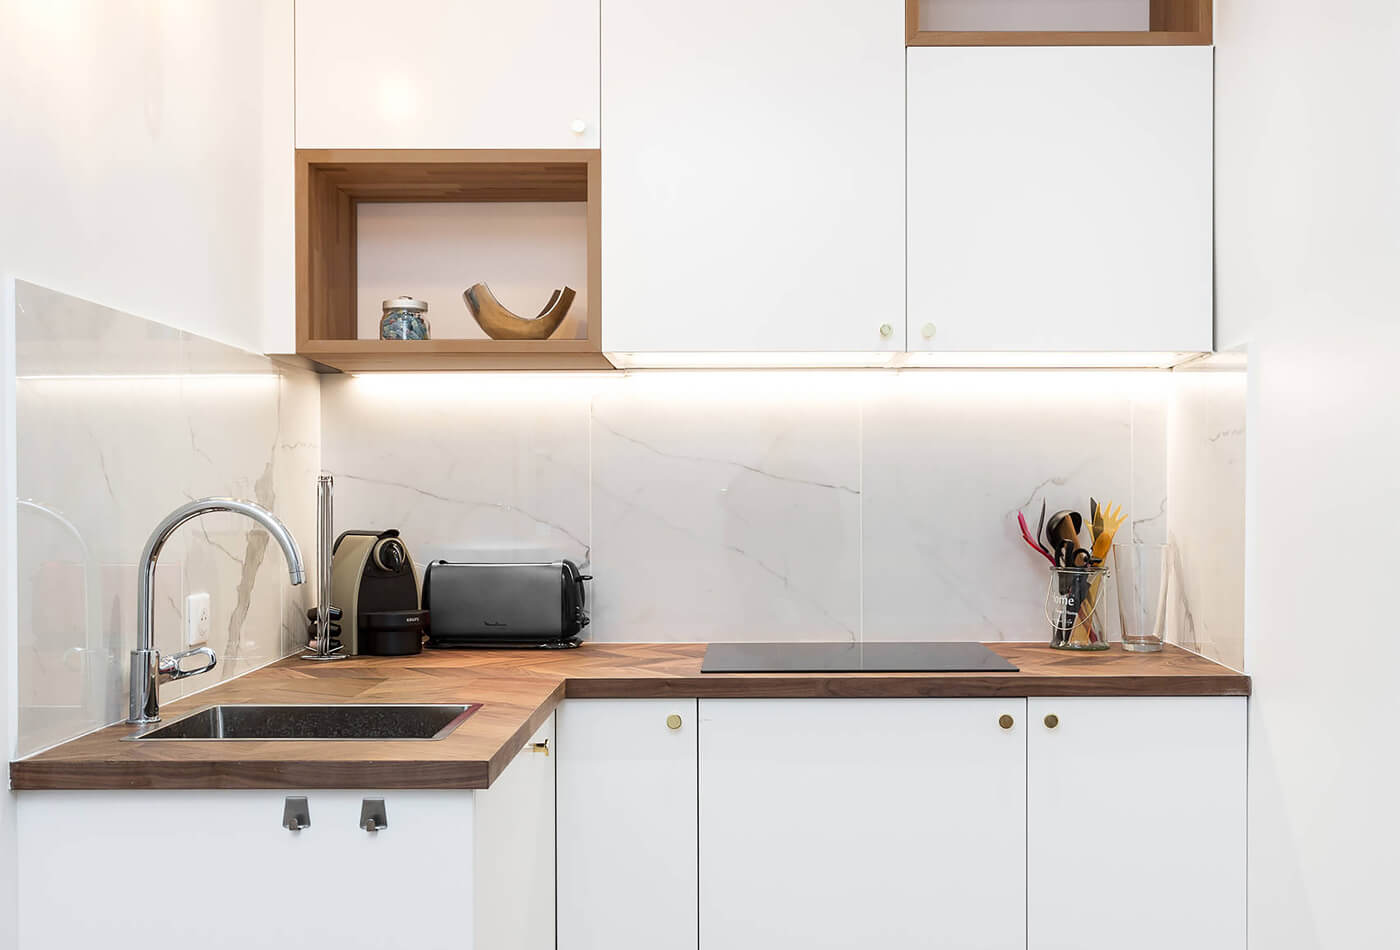 White Stone Backsplashes And Wooden Butcher Blocks Are a Pair Made In Heaven!